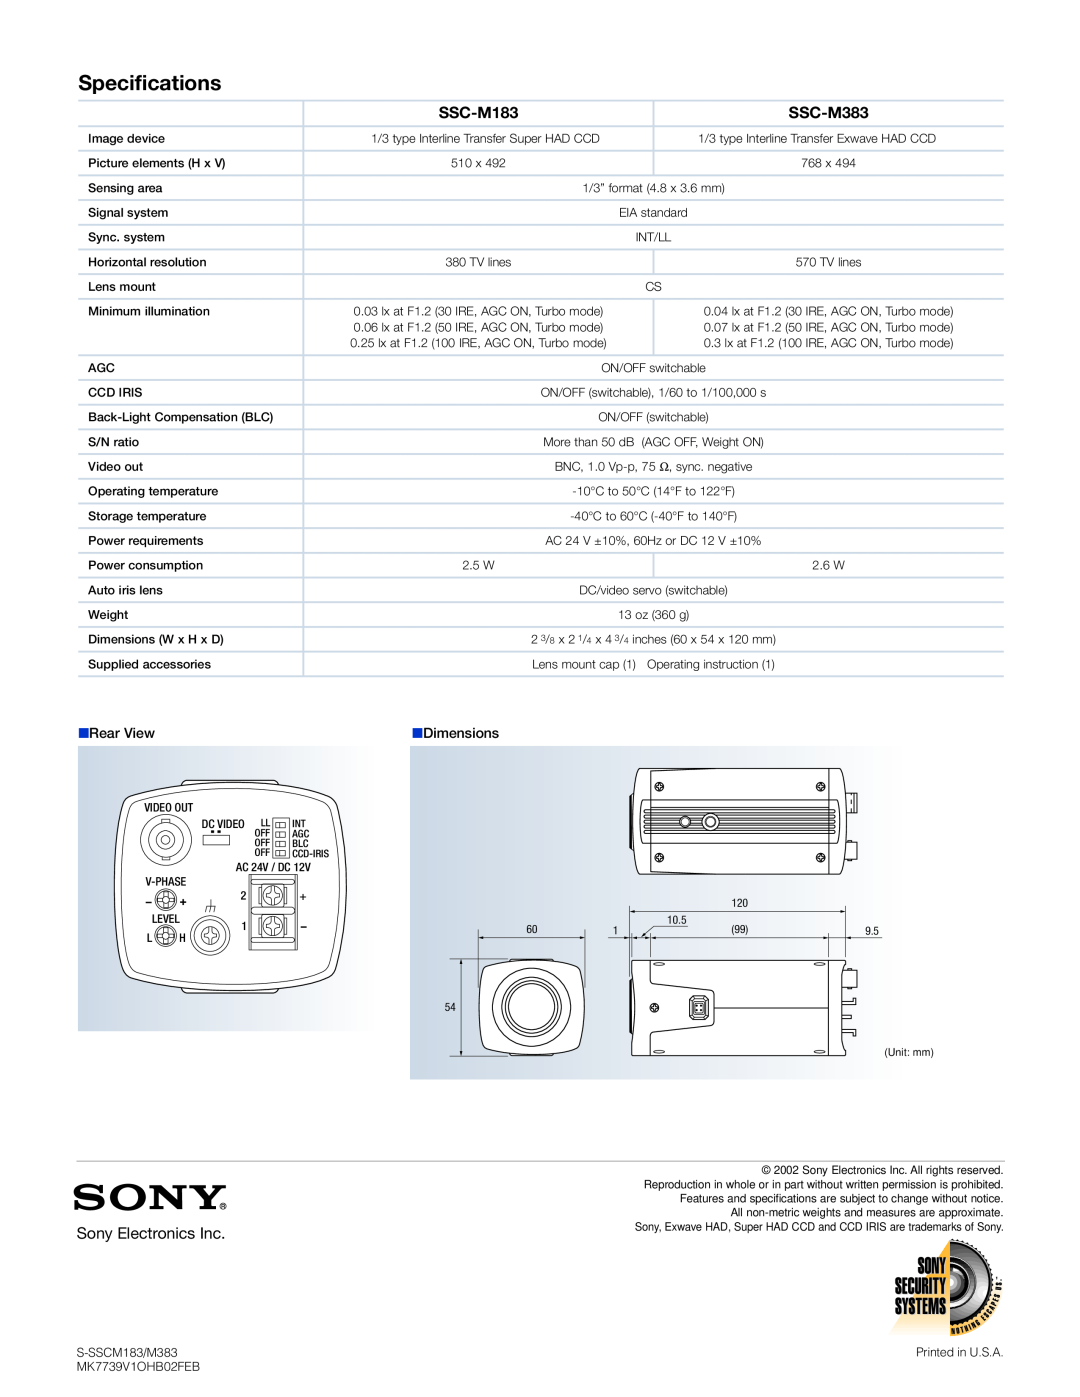 Sony Ssc-M383 manual Specifications, SSC-M183, SSC-M383, Sony Electronics Inc 